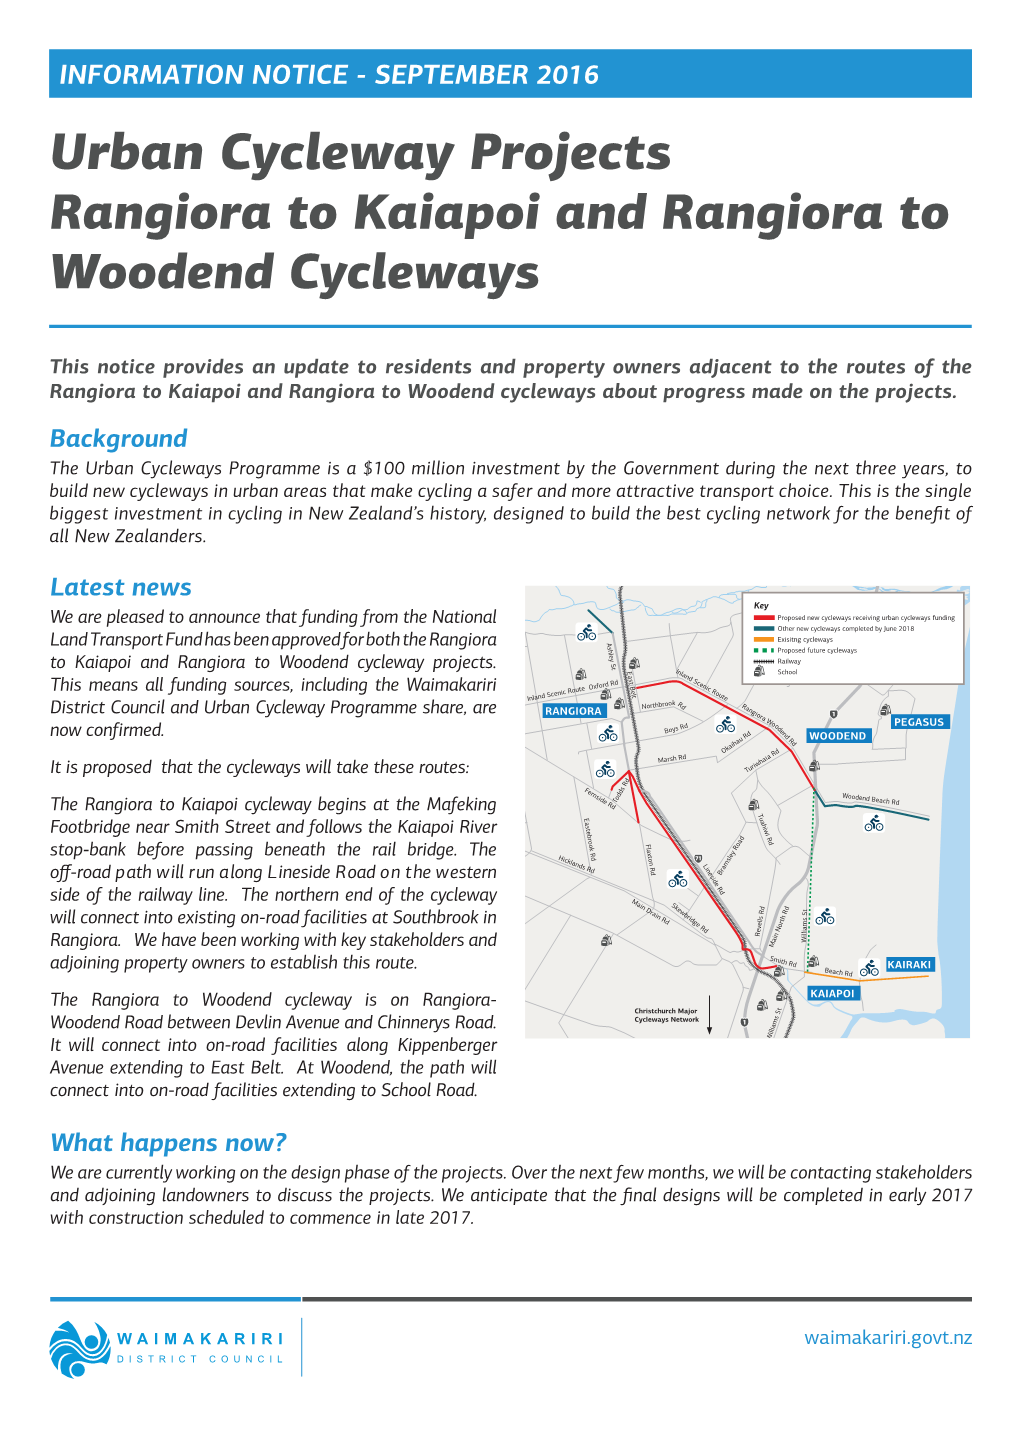 Urban Cycleway Projects Rangiora to Kaiapoi and Rangiora to Woodend Cycleways